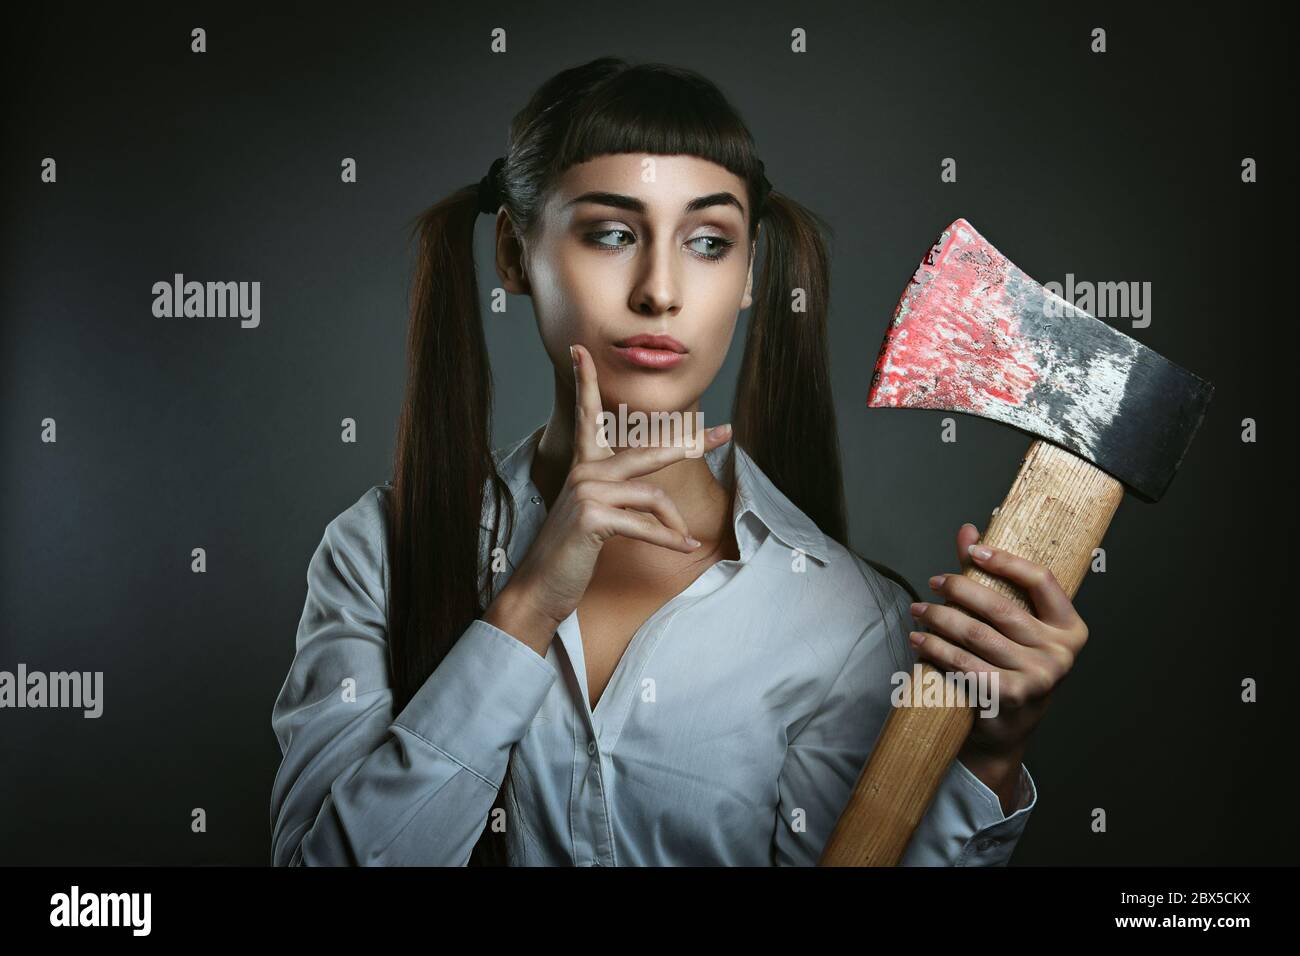 Dangerous woman with axe full of blood. Funny and amazed expression Stock Photo